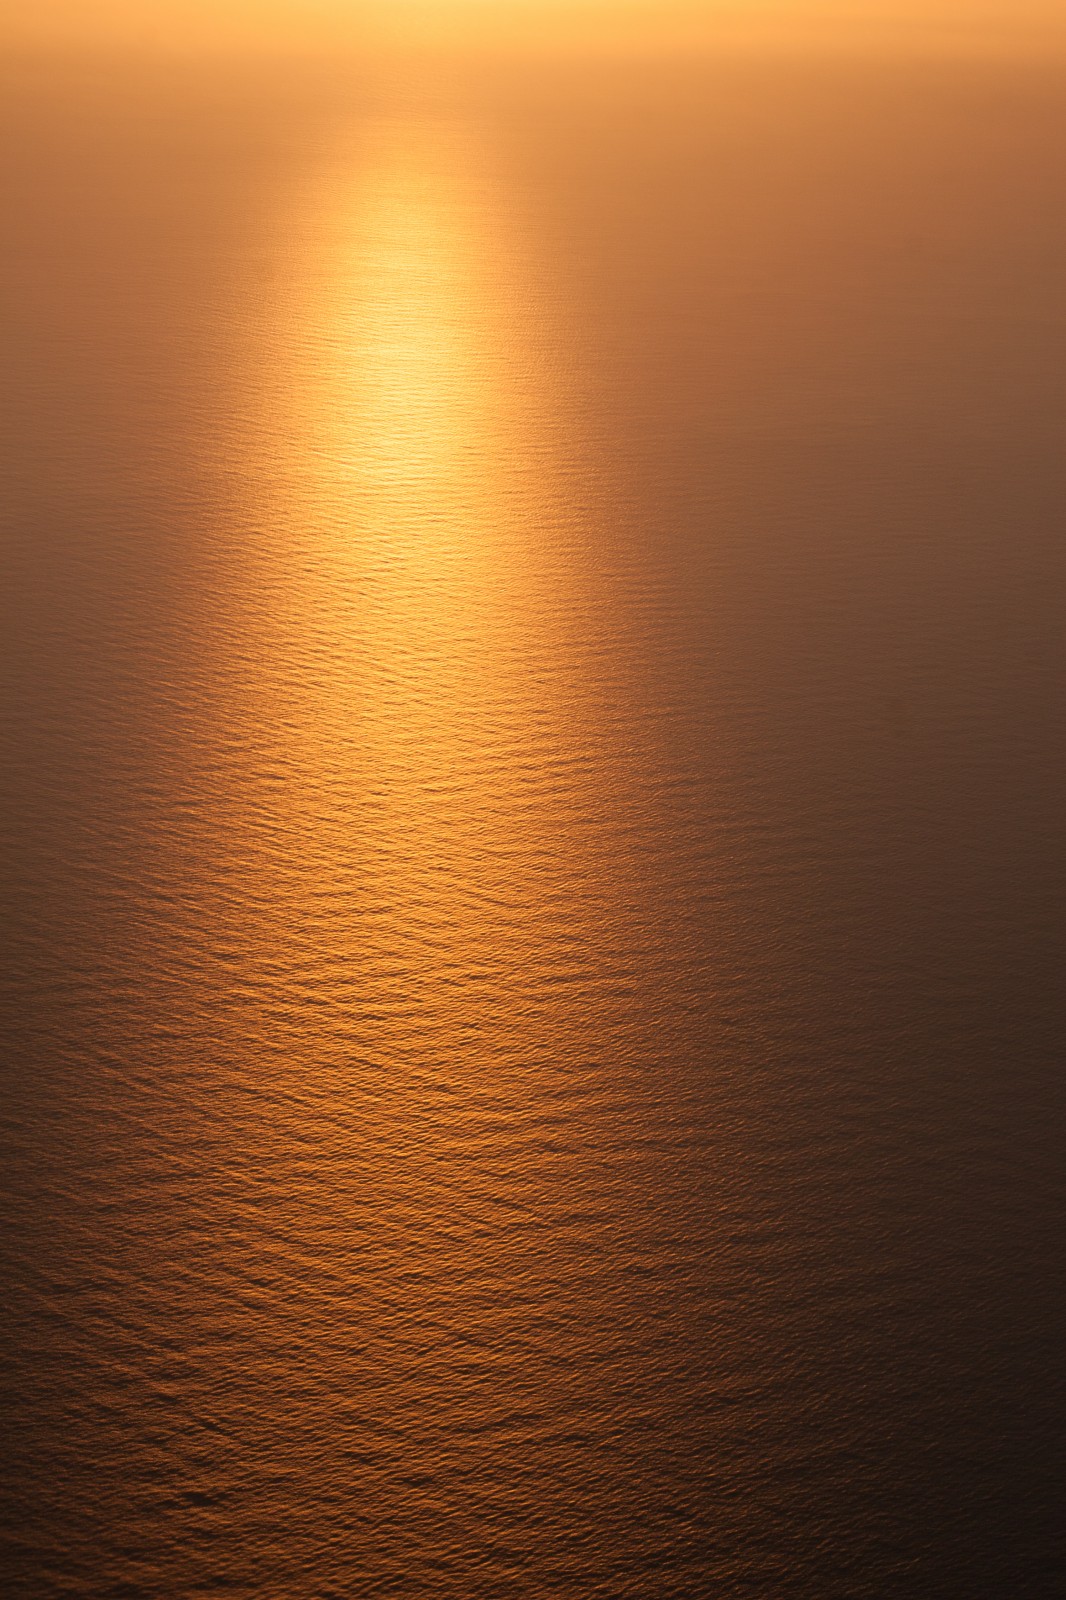 ripples in the sea from a plane at sunrise